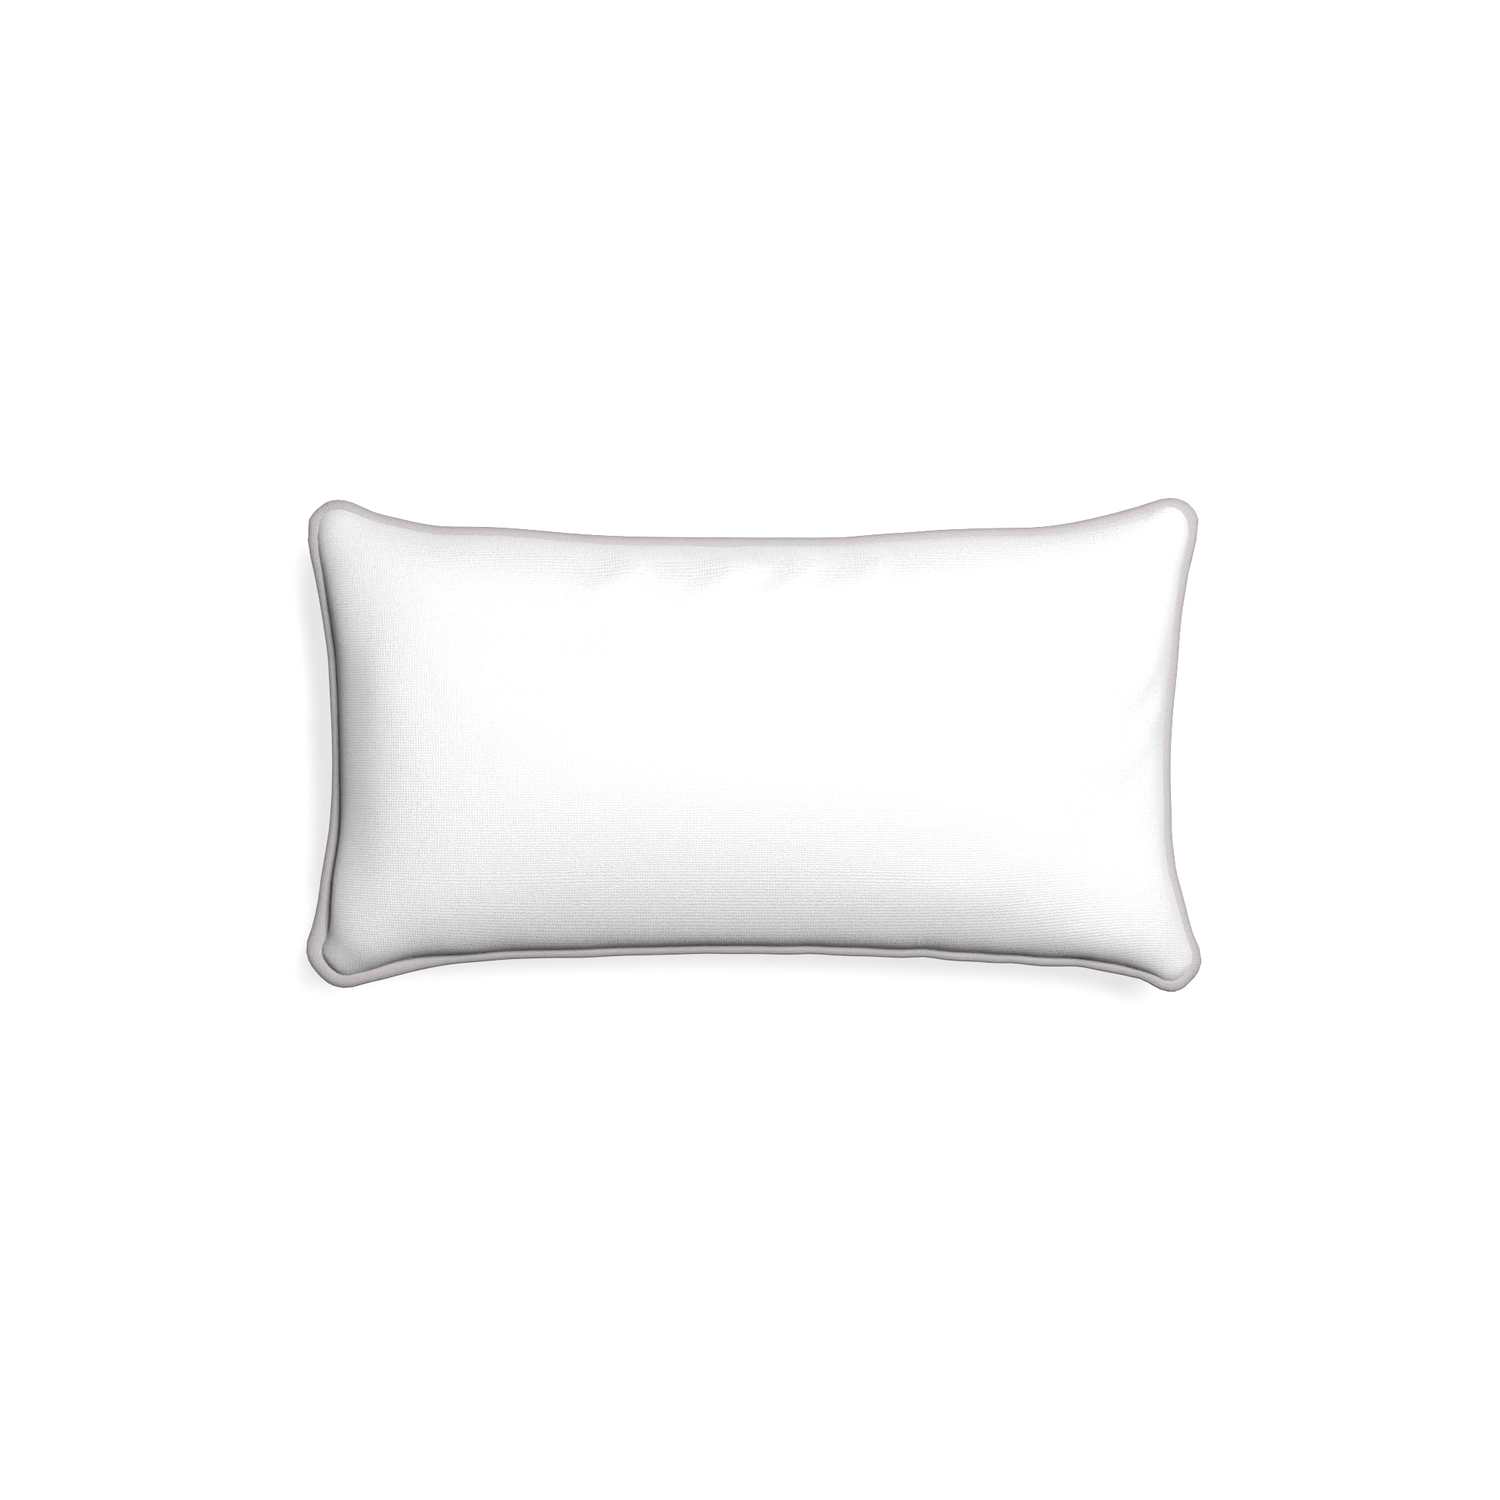 Petite-lumbar snow custom white cottonpillow with pebble piping on white background